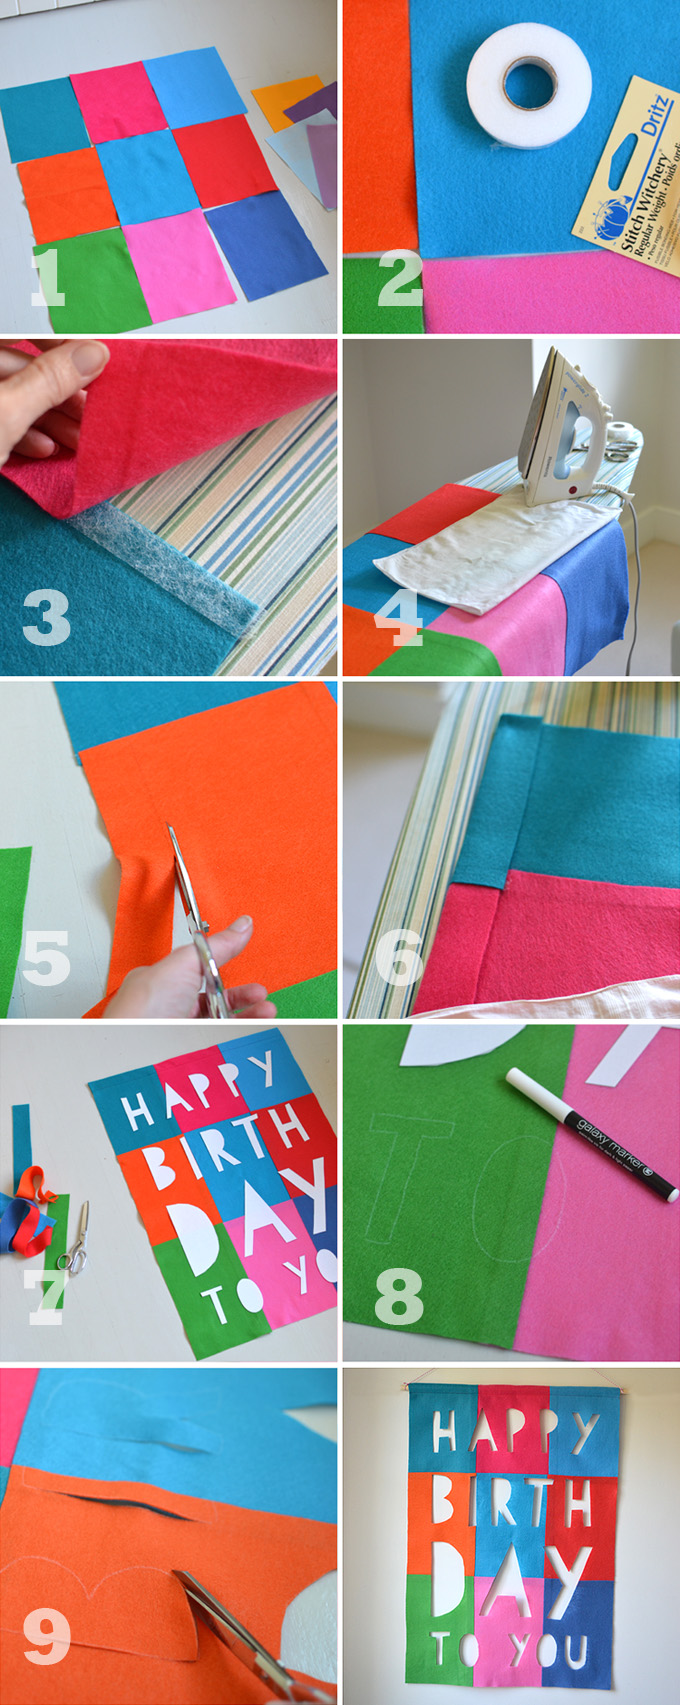 This no-sew happy birthday banner is made from felt and can be used for a lifetime.